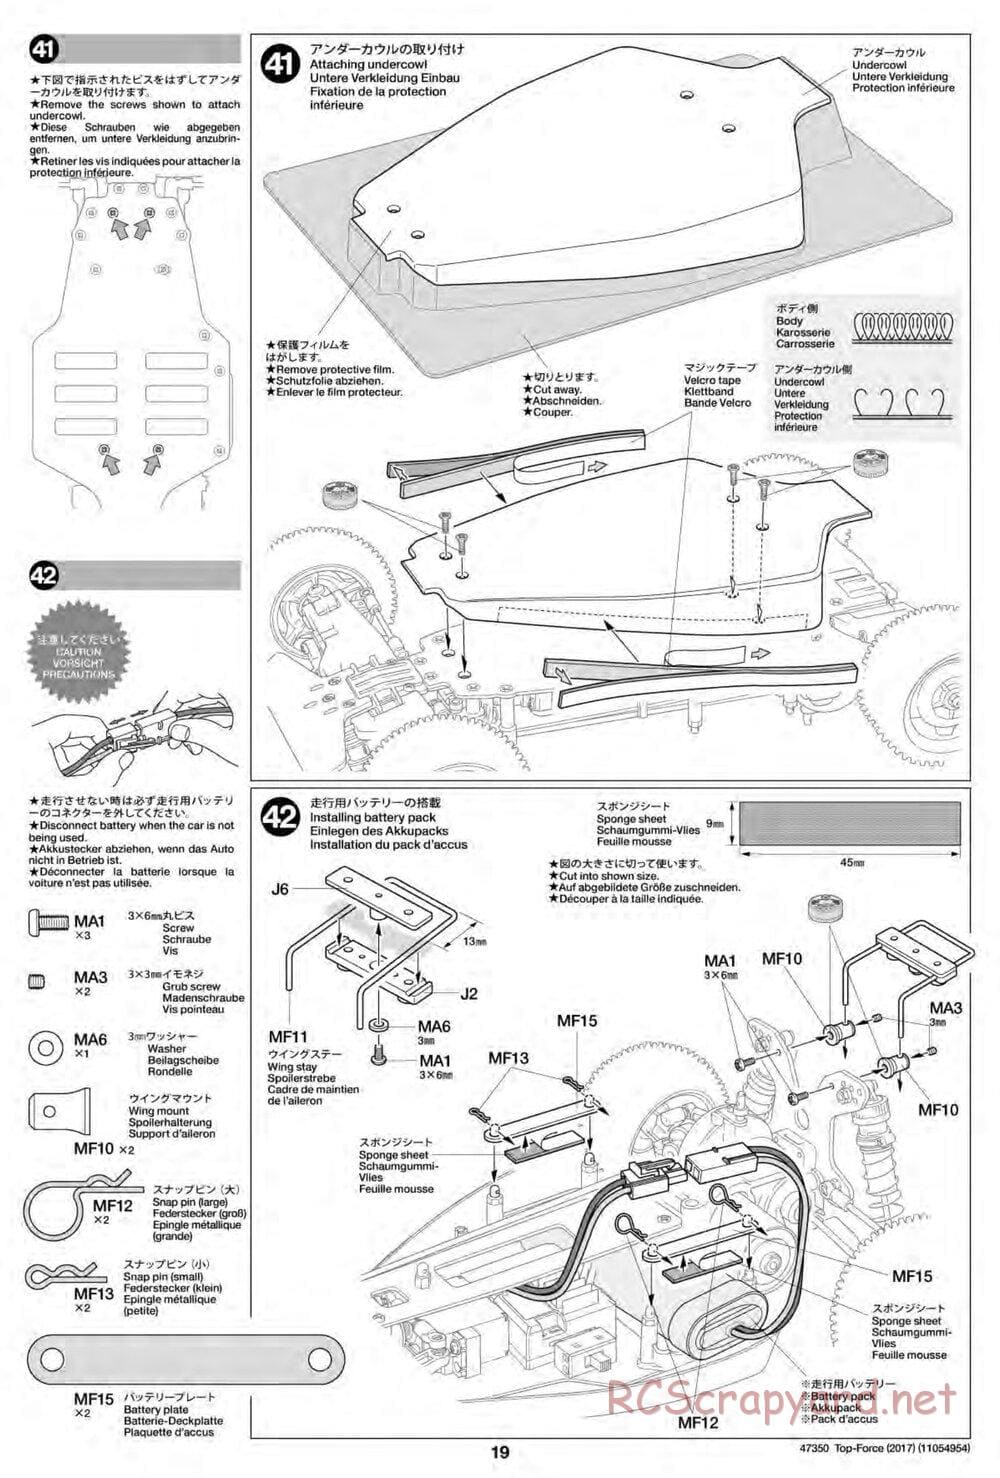 Tamiya - Top Force 2017 - DF-01 Chassis - Manual - Page 19